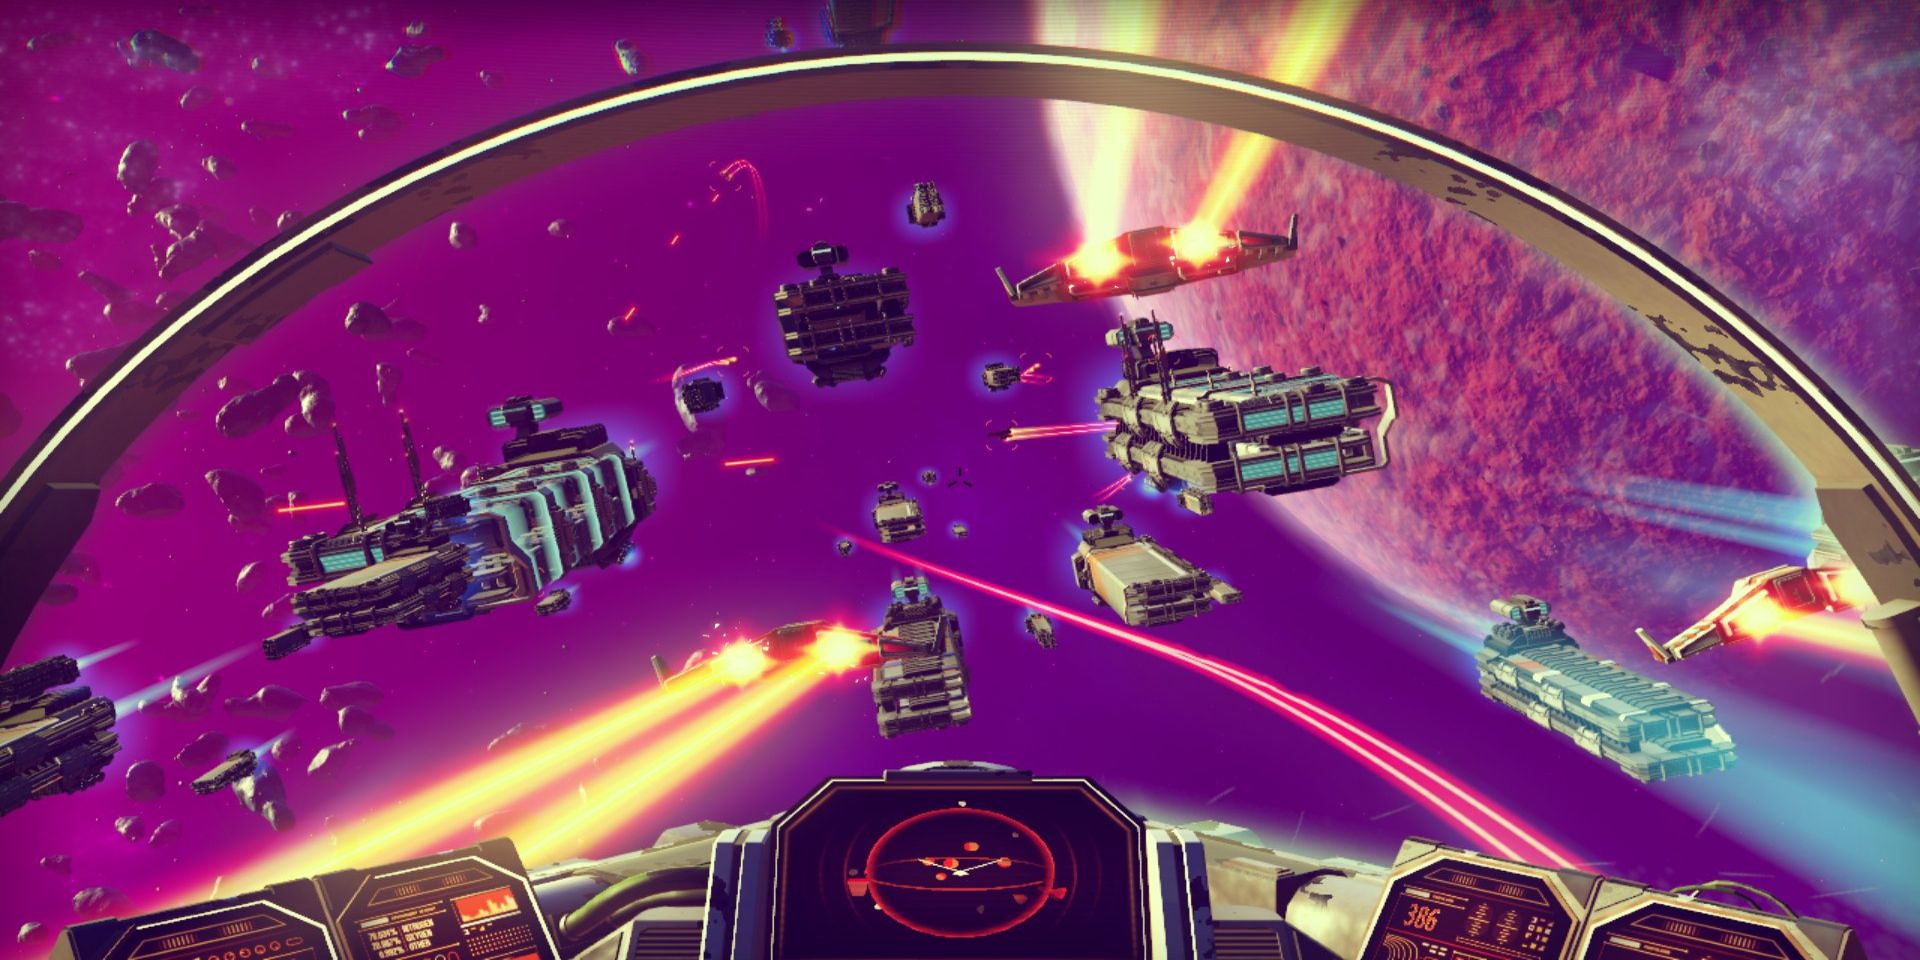 A space battle taking place in the 2016 video game No Man's Sky.